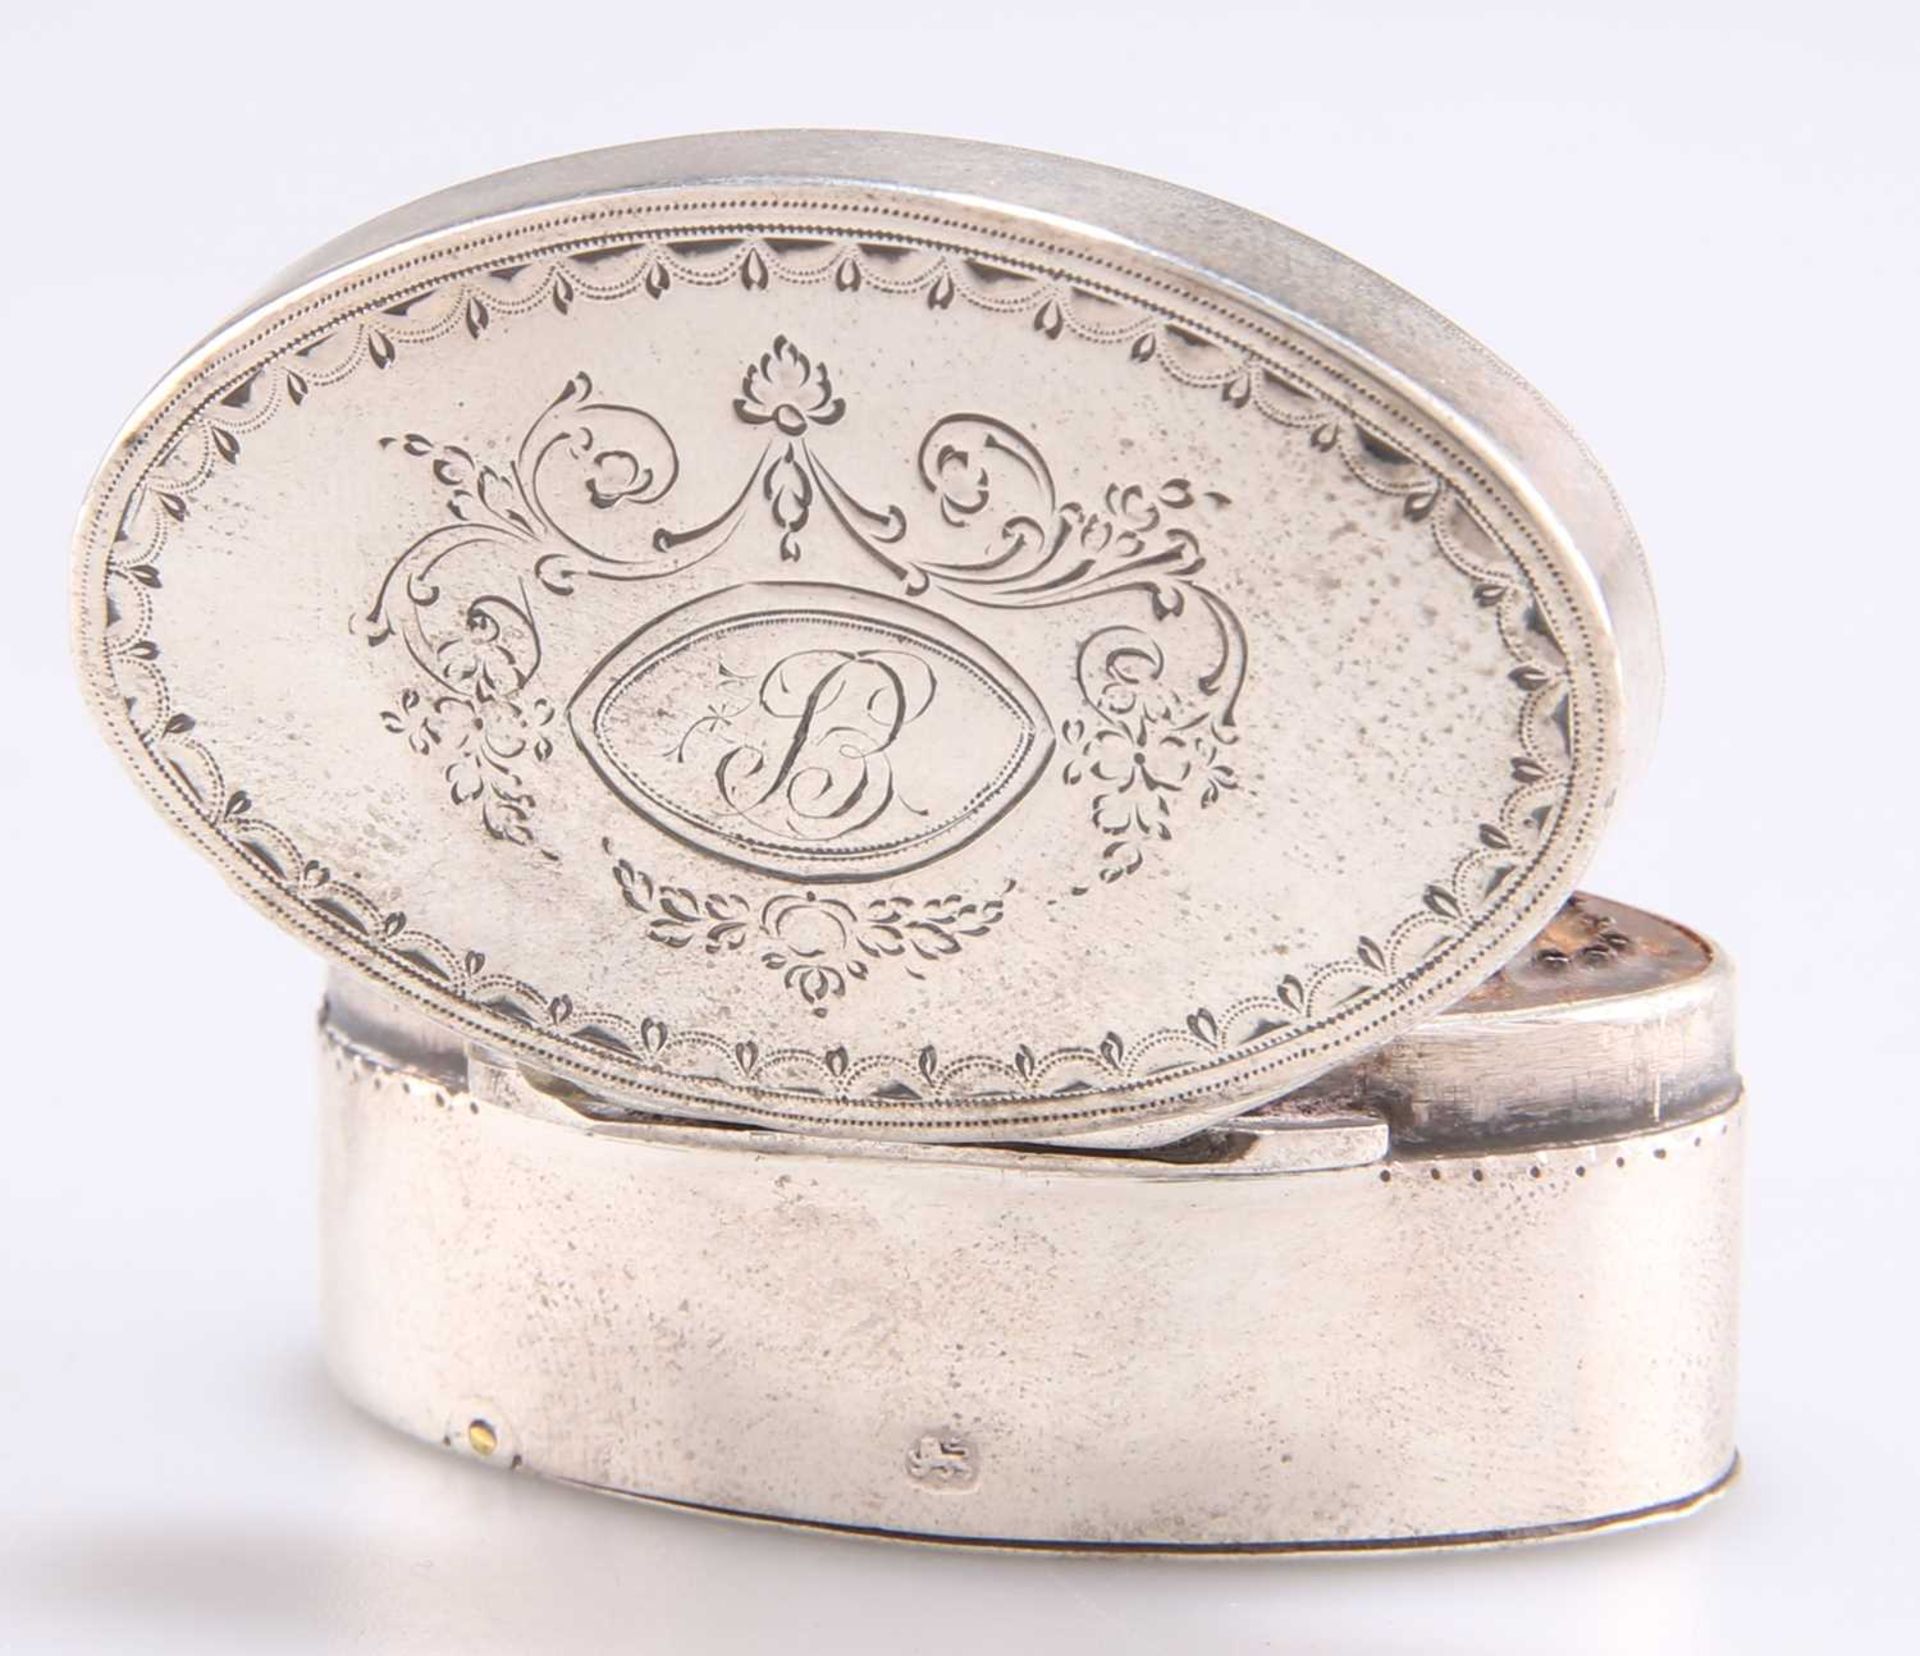 A GEORGE III LARGE SILVER NUTMEG GRATER